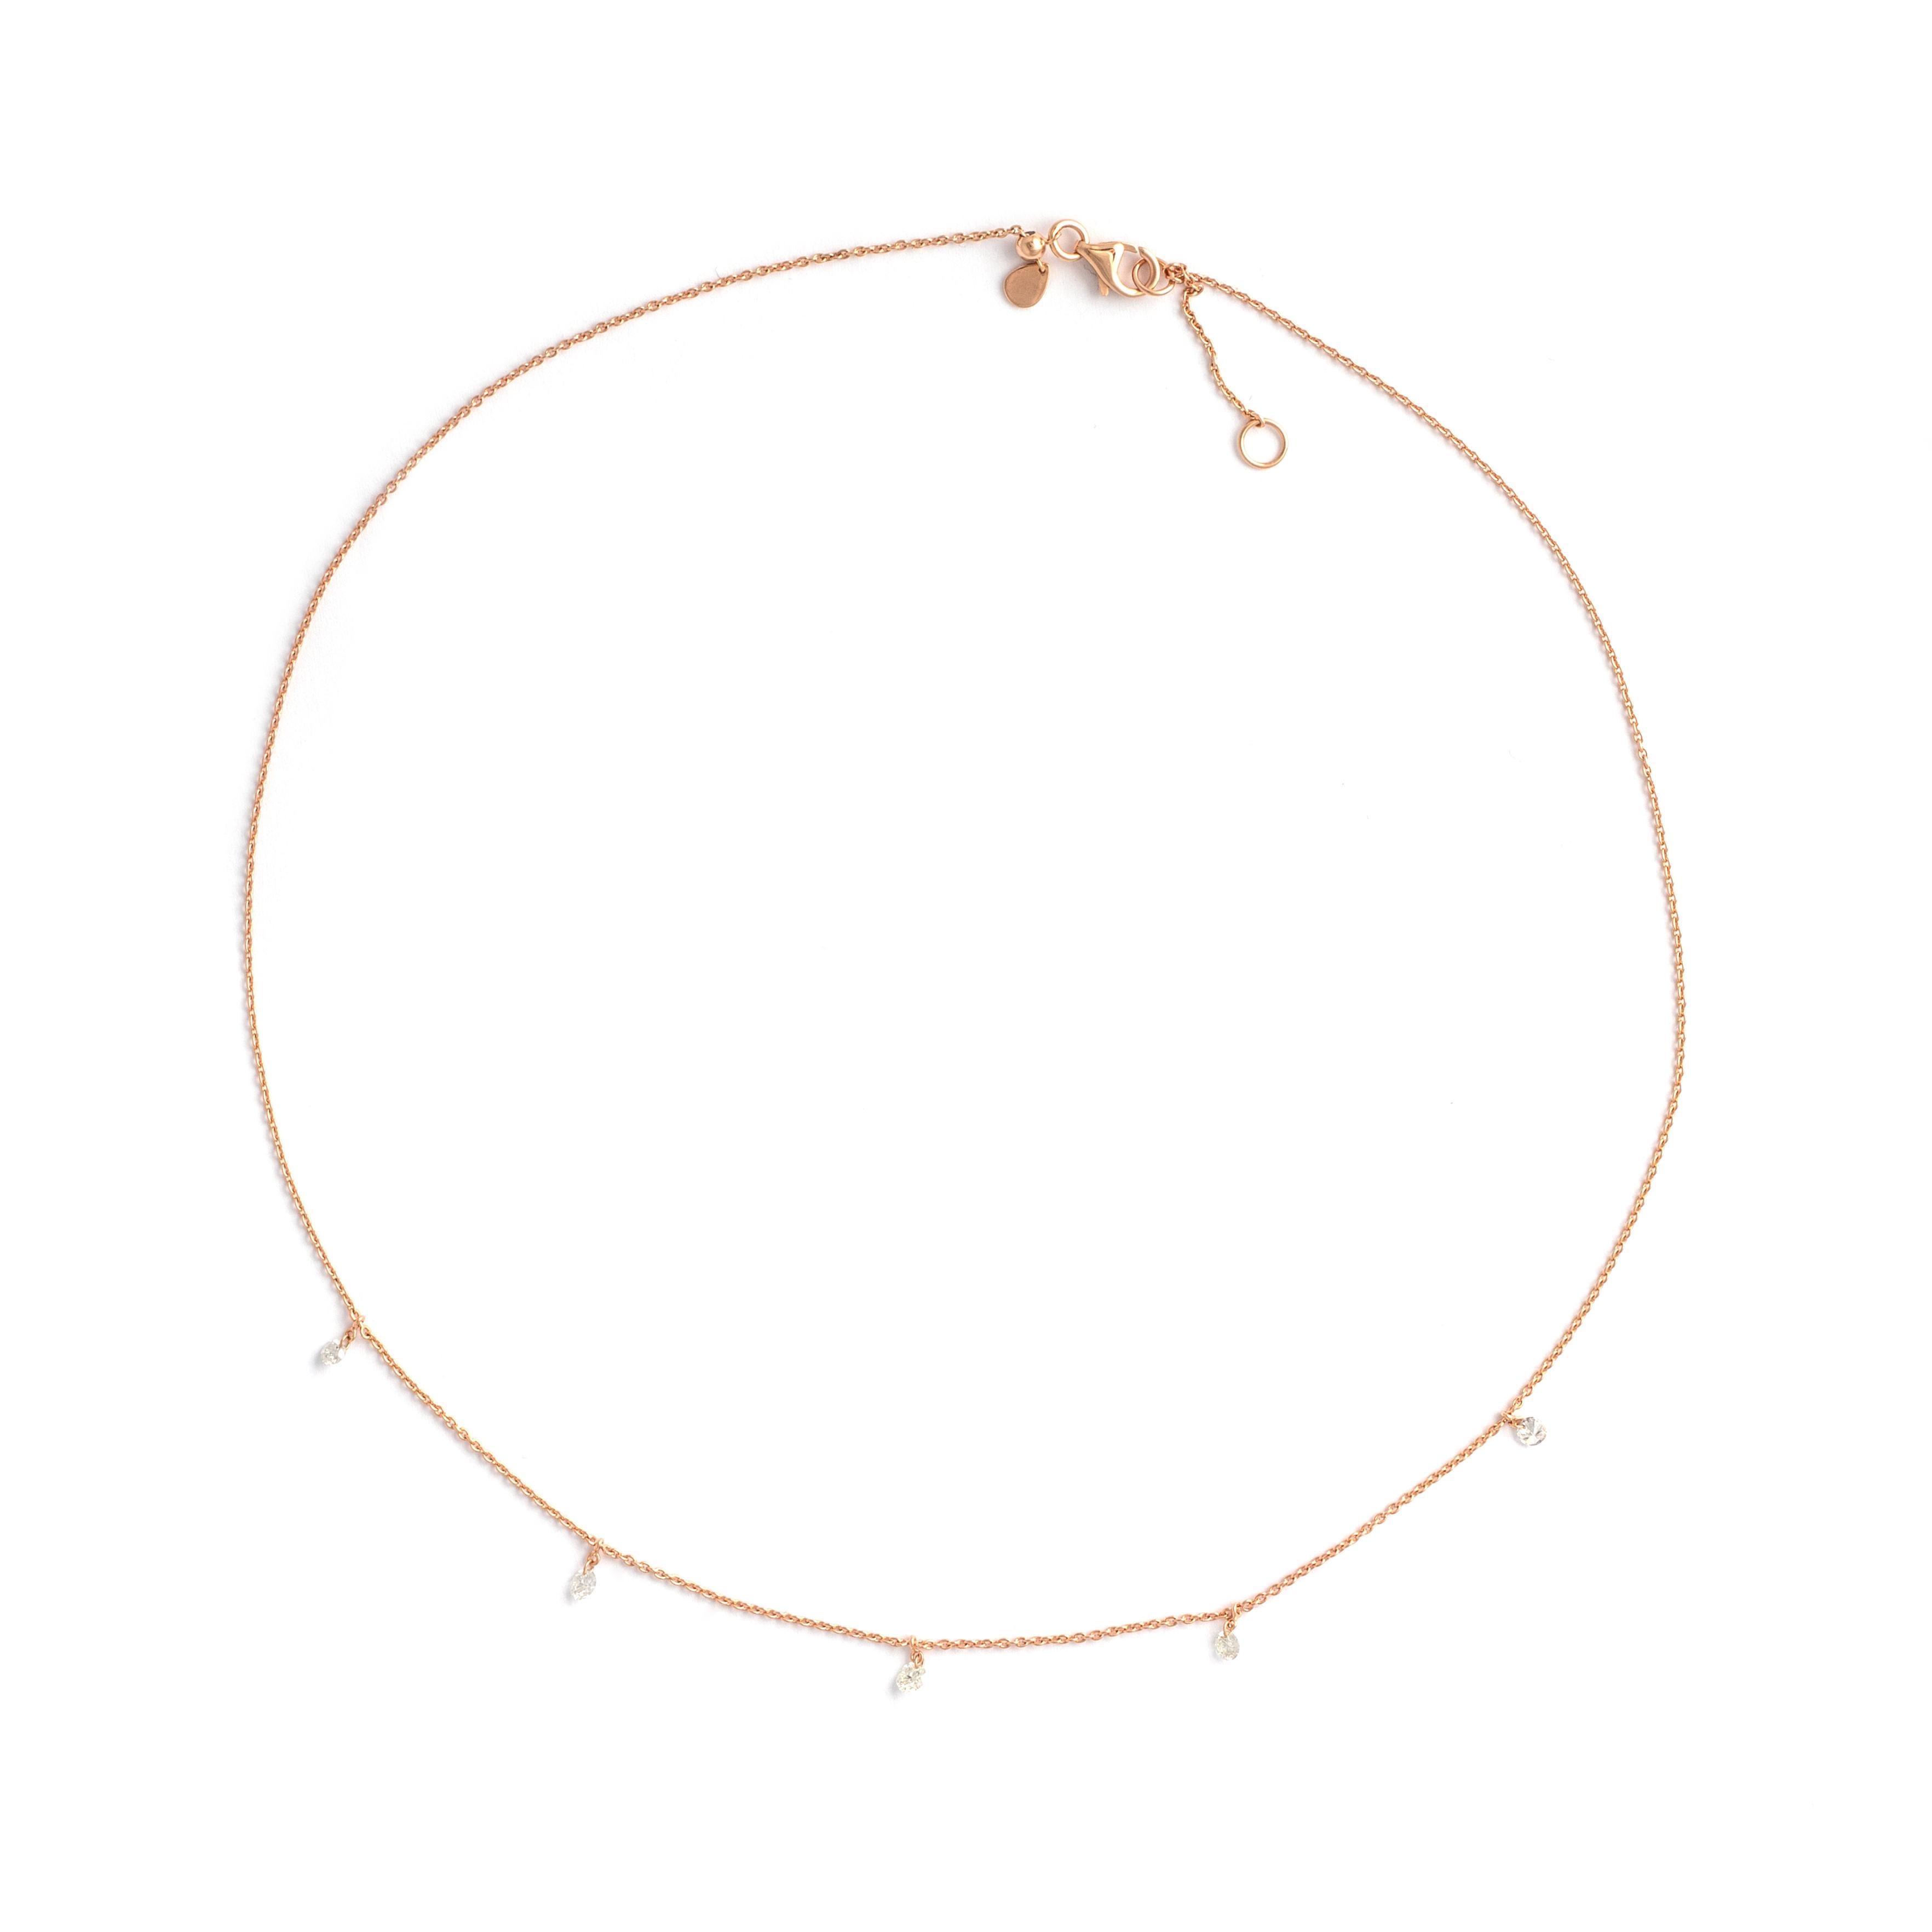 Necklace in rose gold 18K round cut diamonds 0.45 carat, estimated G color and Si1 clarity. 
Total gross weight: 2.65 grams.
Lenght: 43.00 centimeters up to 45.50 centimeters
